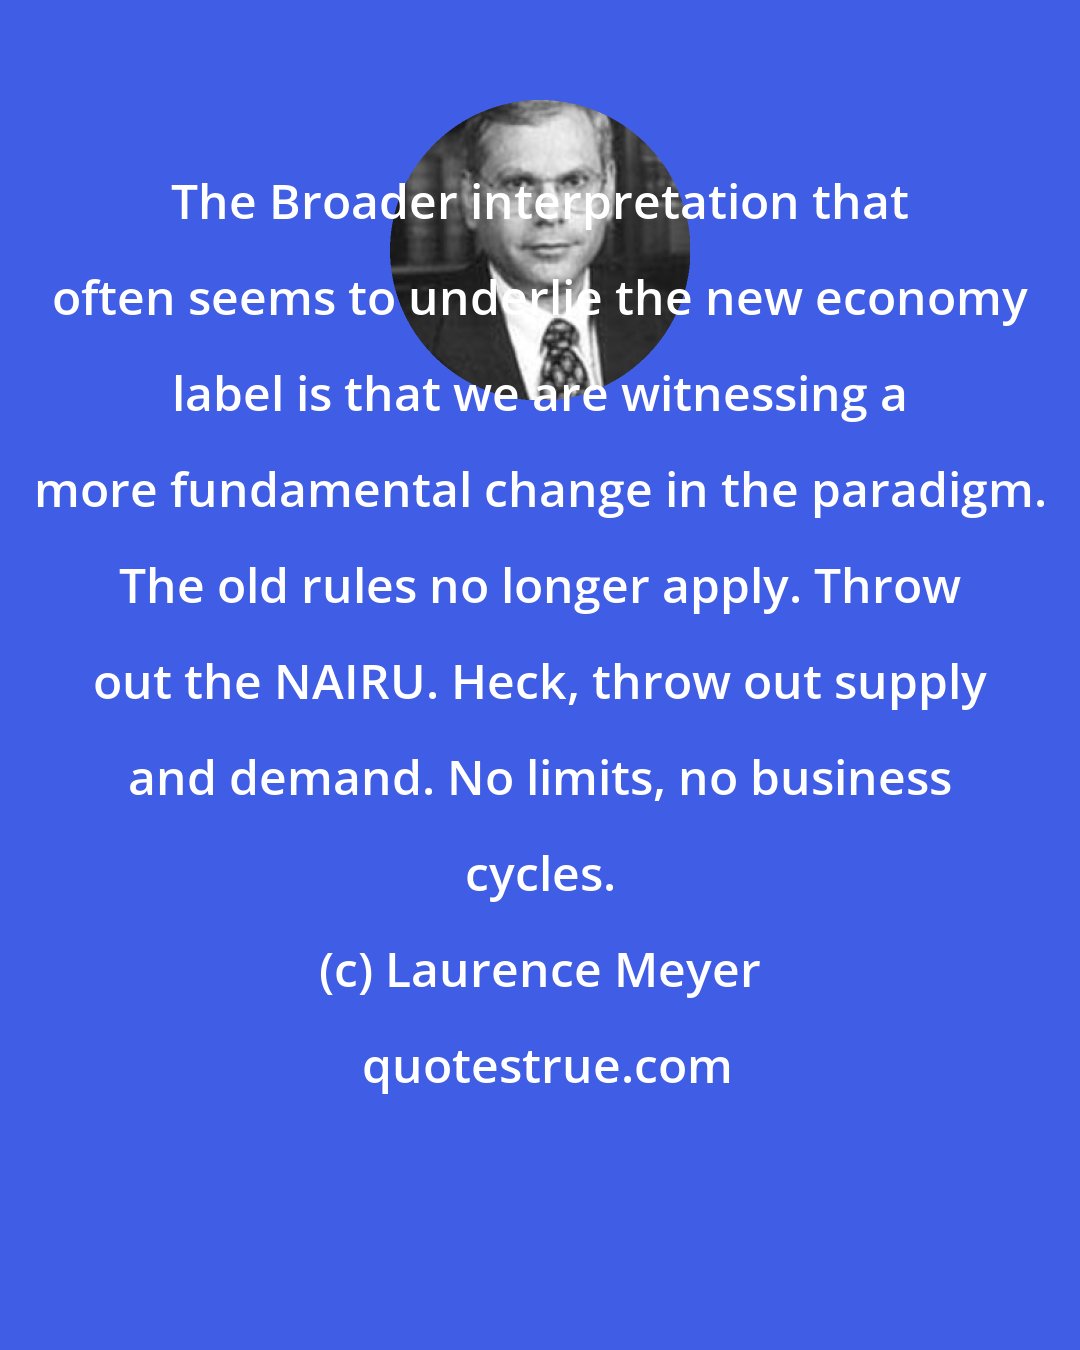 Laurence Meyer: The Broader interpretation that often seems to underlie the new economy label is that we are witnessing a more fundamental change in the paradigm. The old rules no longer apply. Throw out the NAIRU. Heck, throw out supply and demand. No limits, no business cycles.